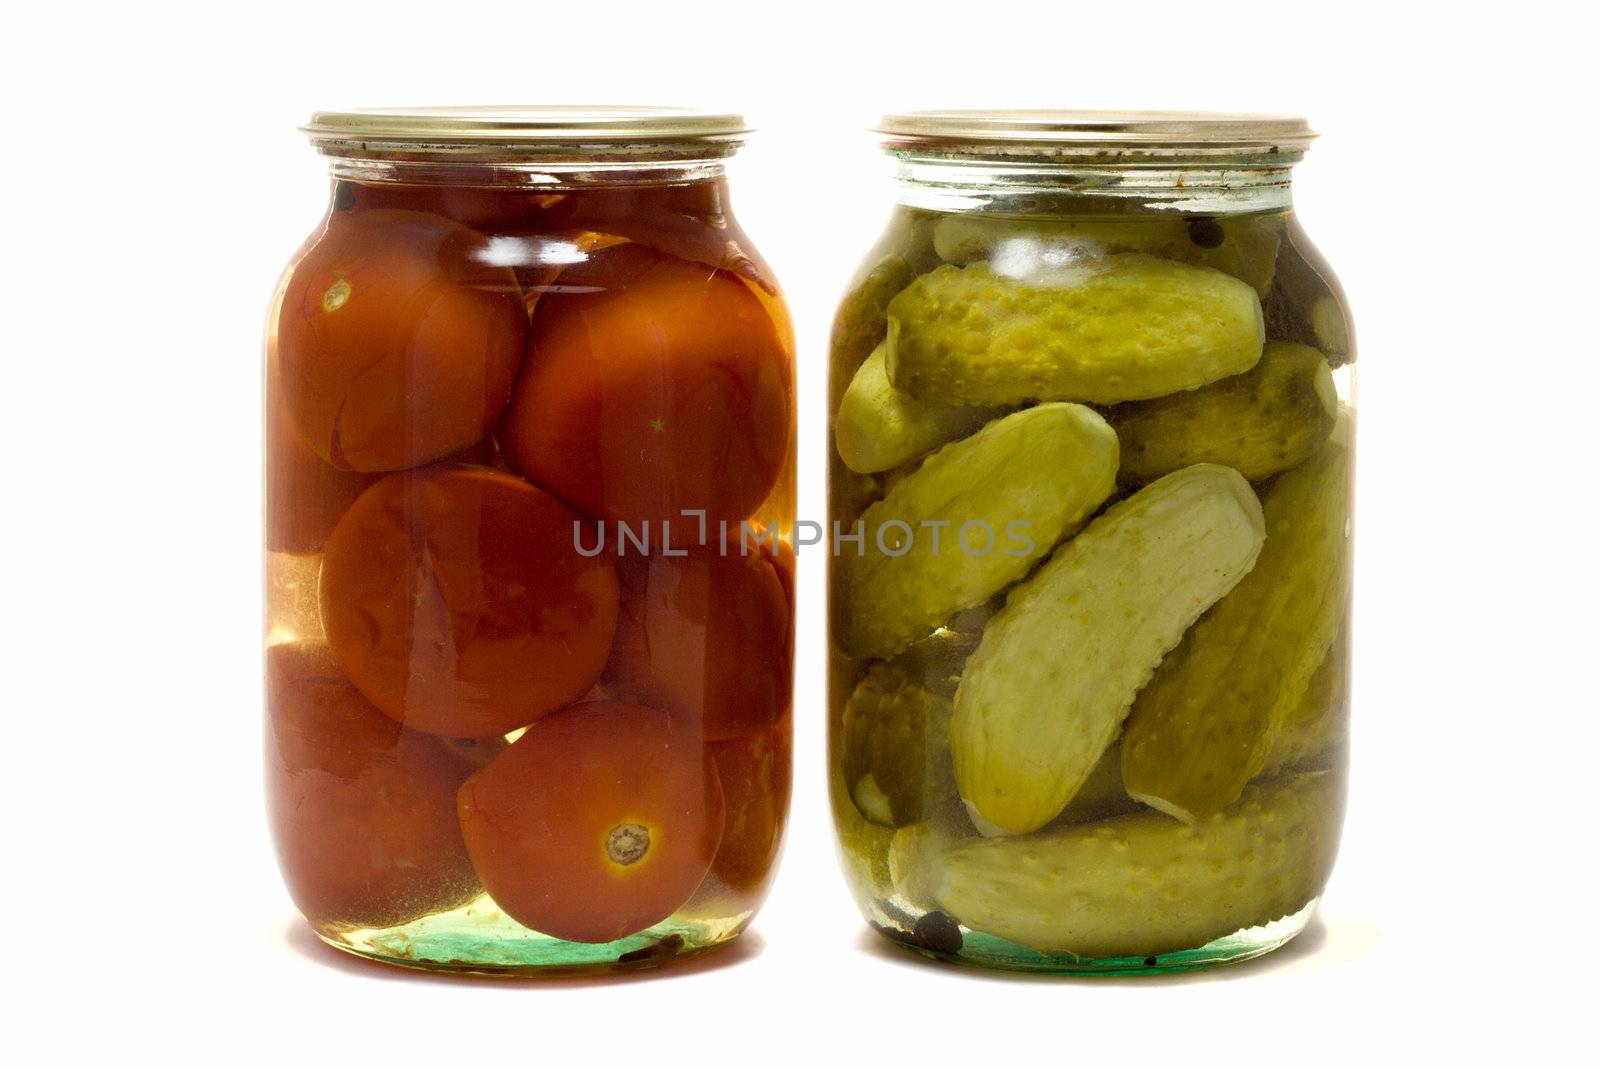 two glass jars with preserved tomatoes and cucumbers by Alekcey